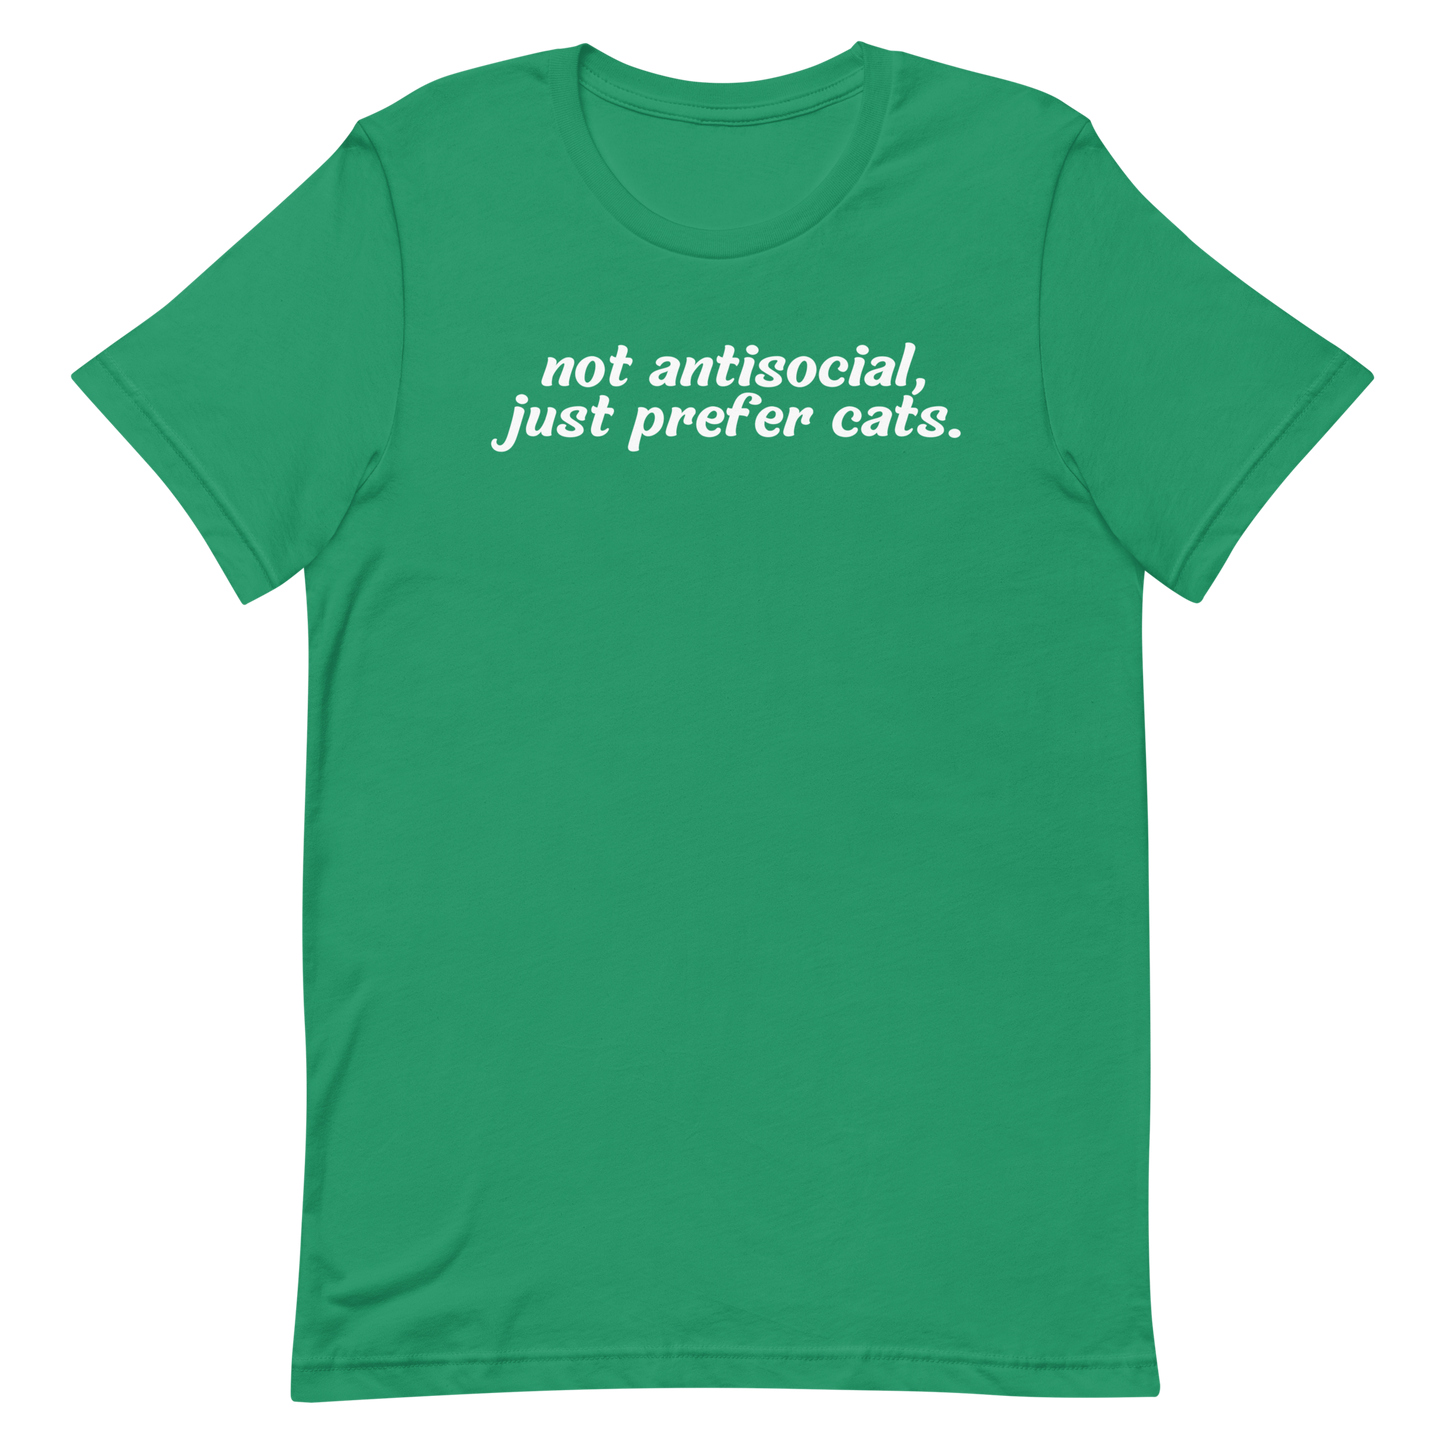 not antisocial, just prefer cats.